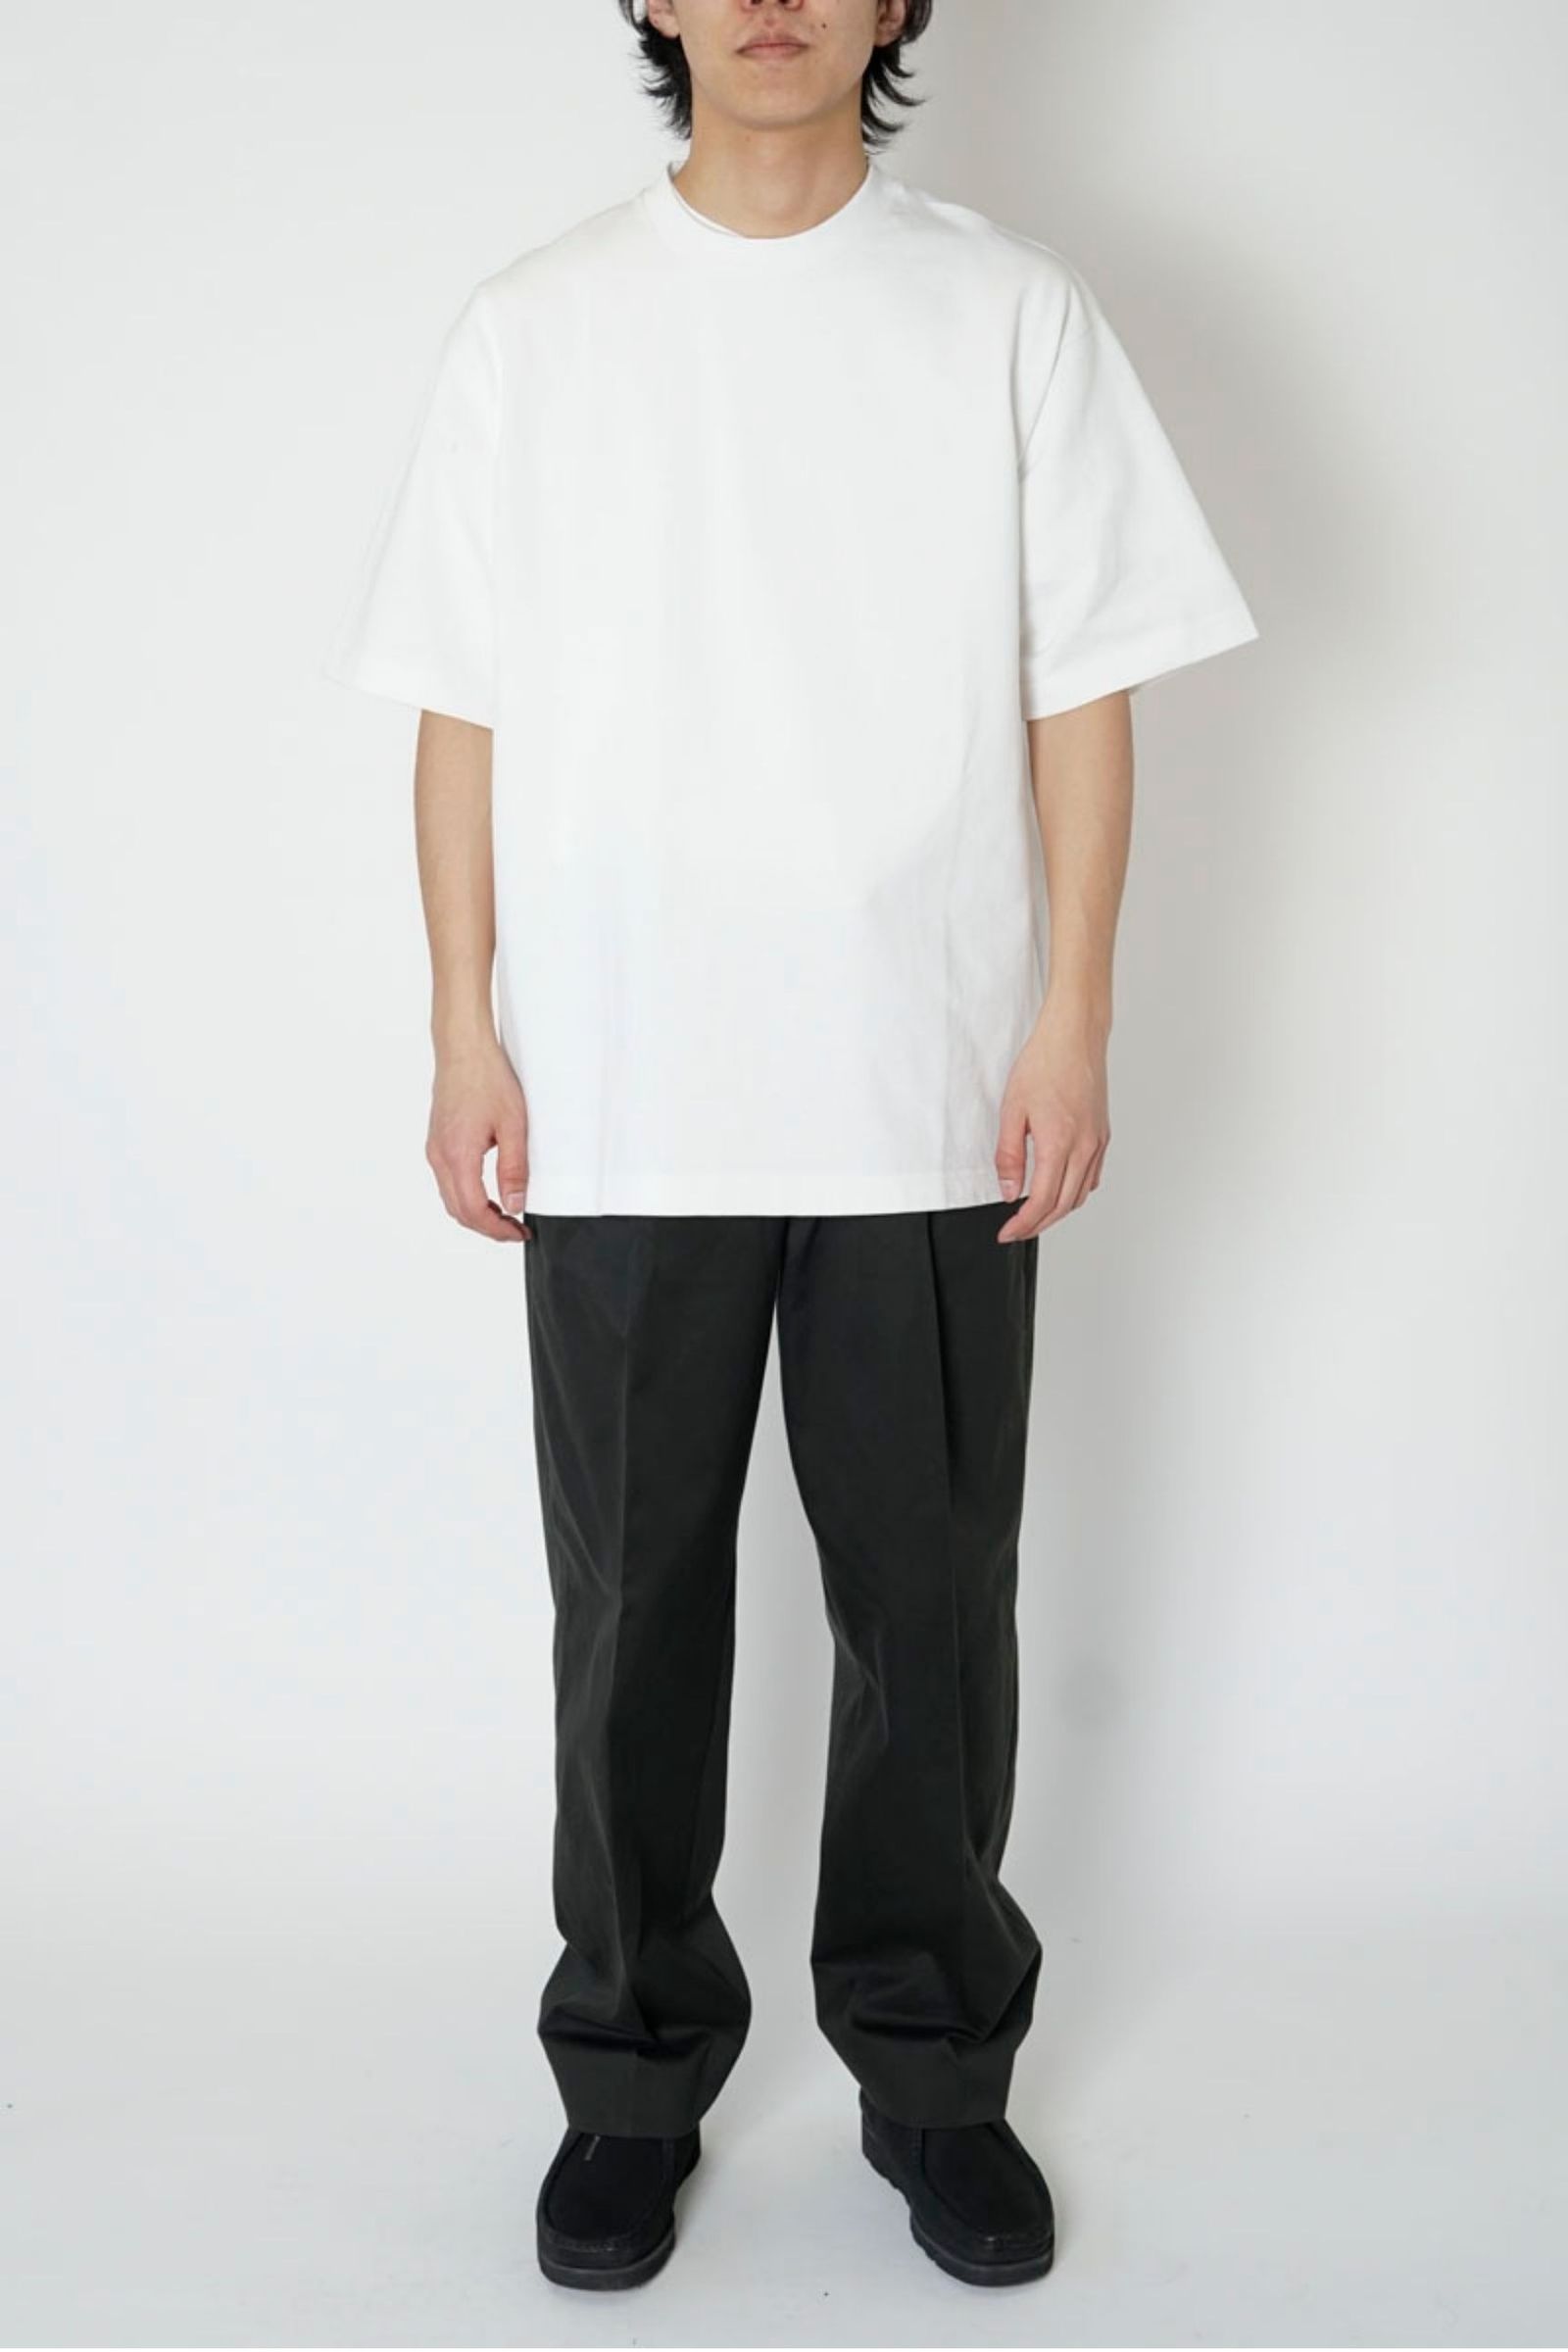 UNIVERSAL PRODUCTS - [ラスト1点] S/S T-SHIRTS/WHITE 